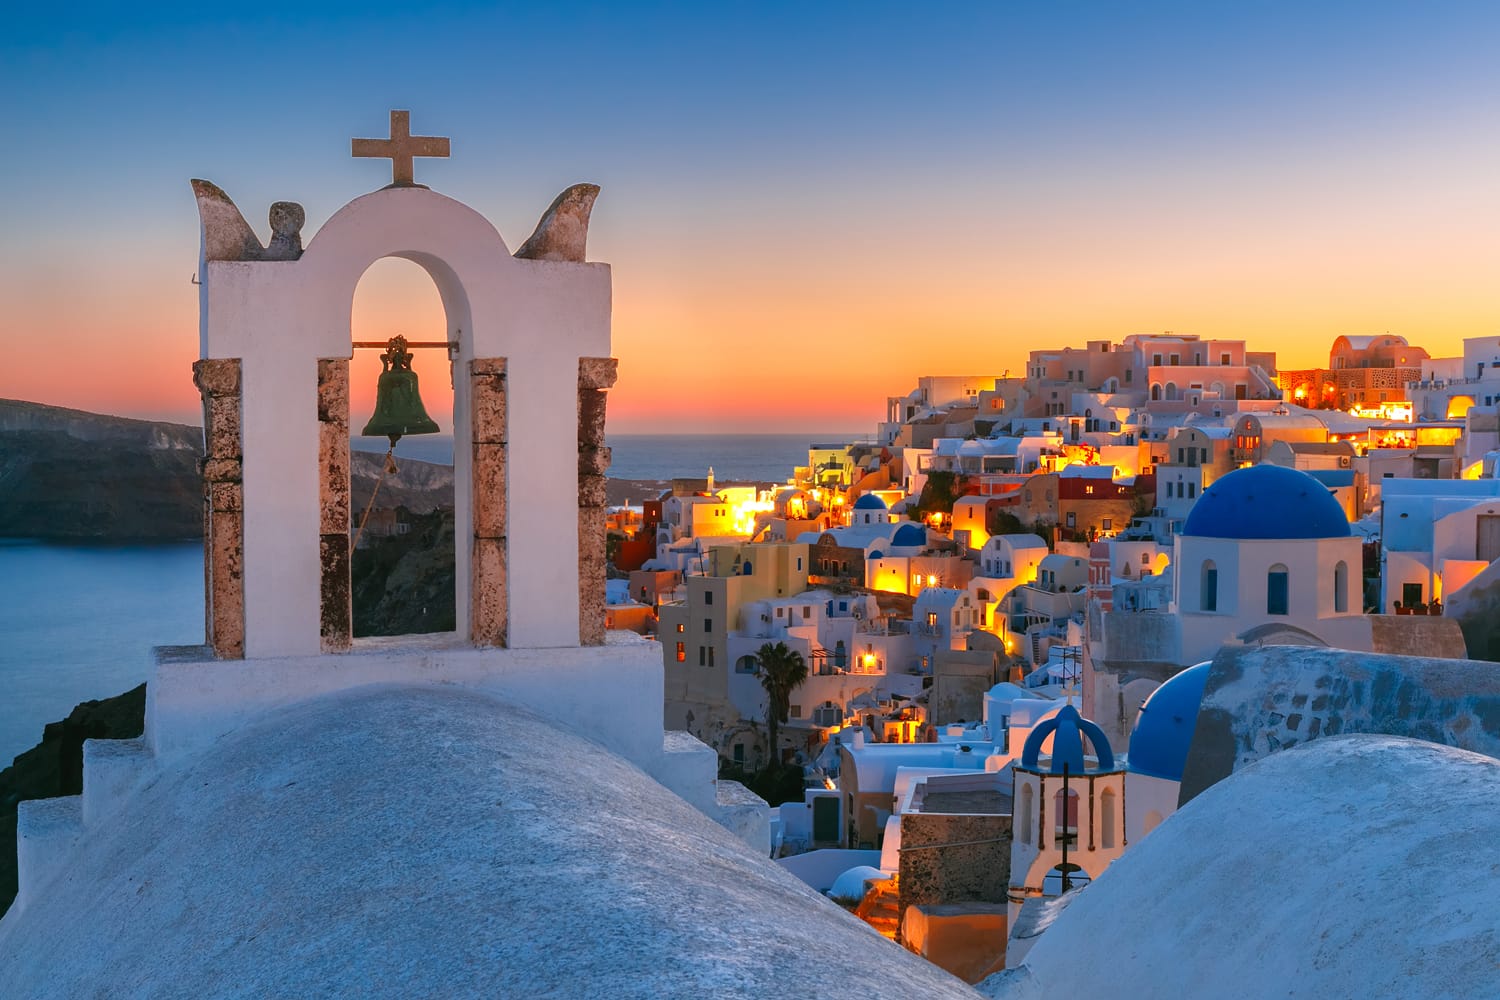 Arch with a bell, white houses and church with blue domes in Oia or Ia at golden sunset, island Santorini, Greece.